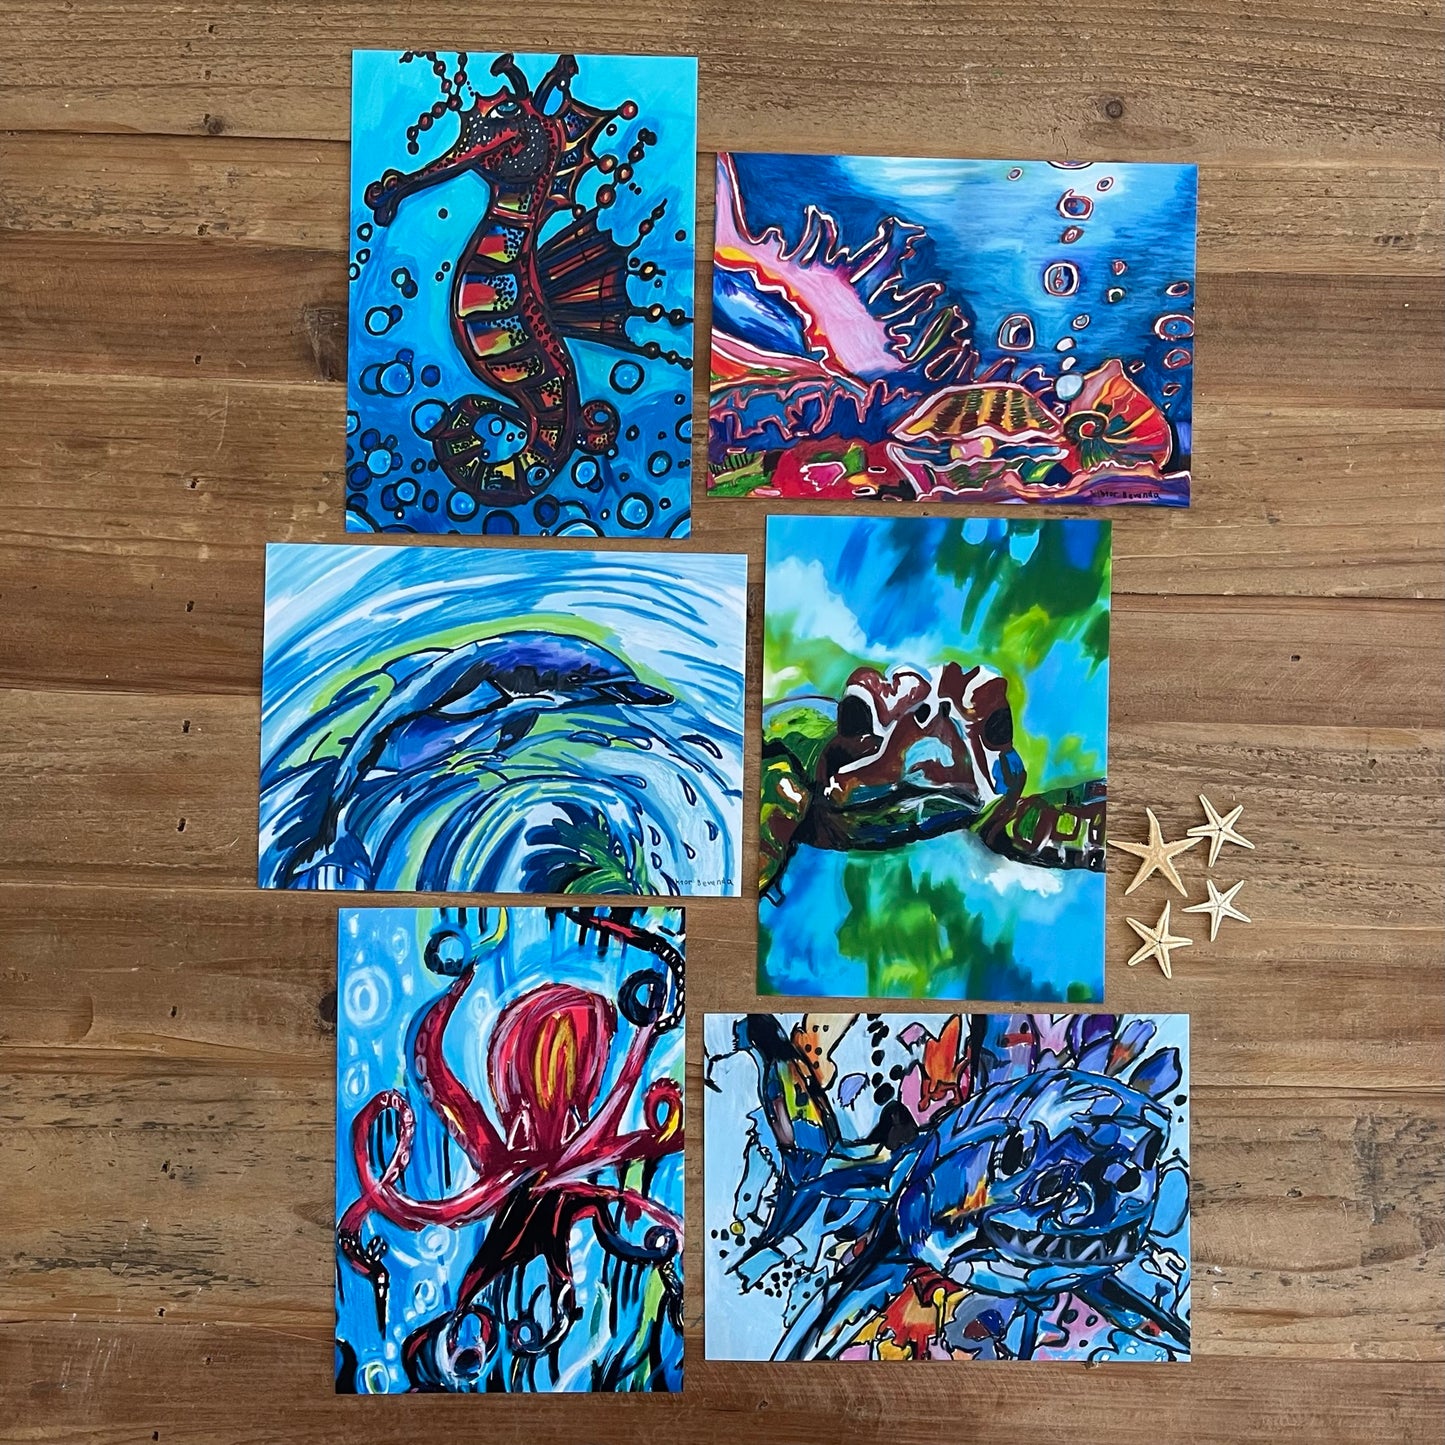 Marine life prints in size 5x7" - set of 6 for $25